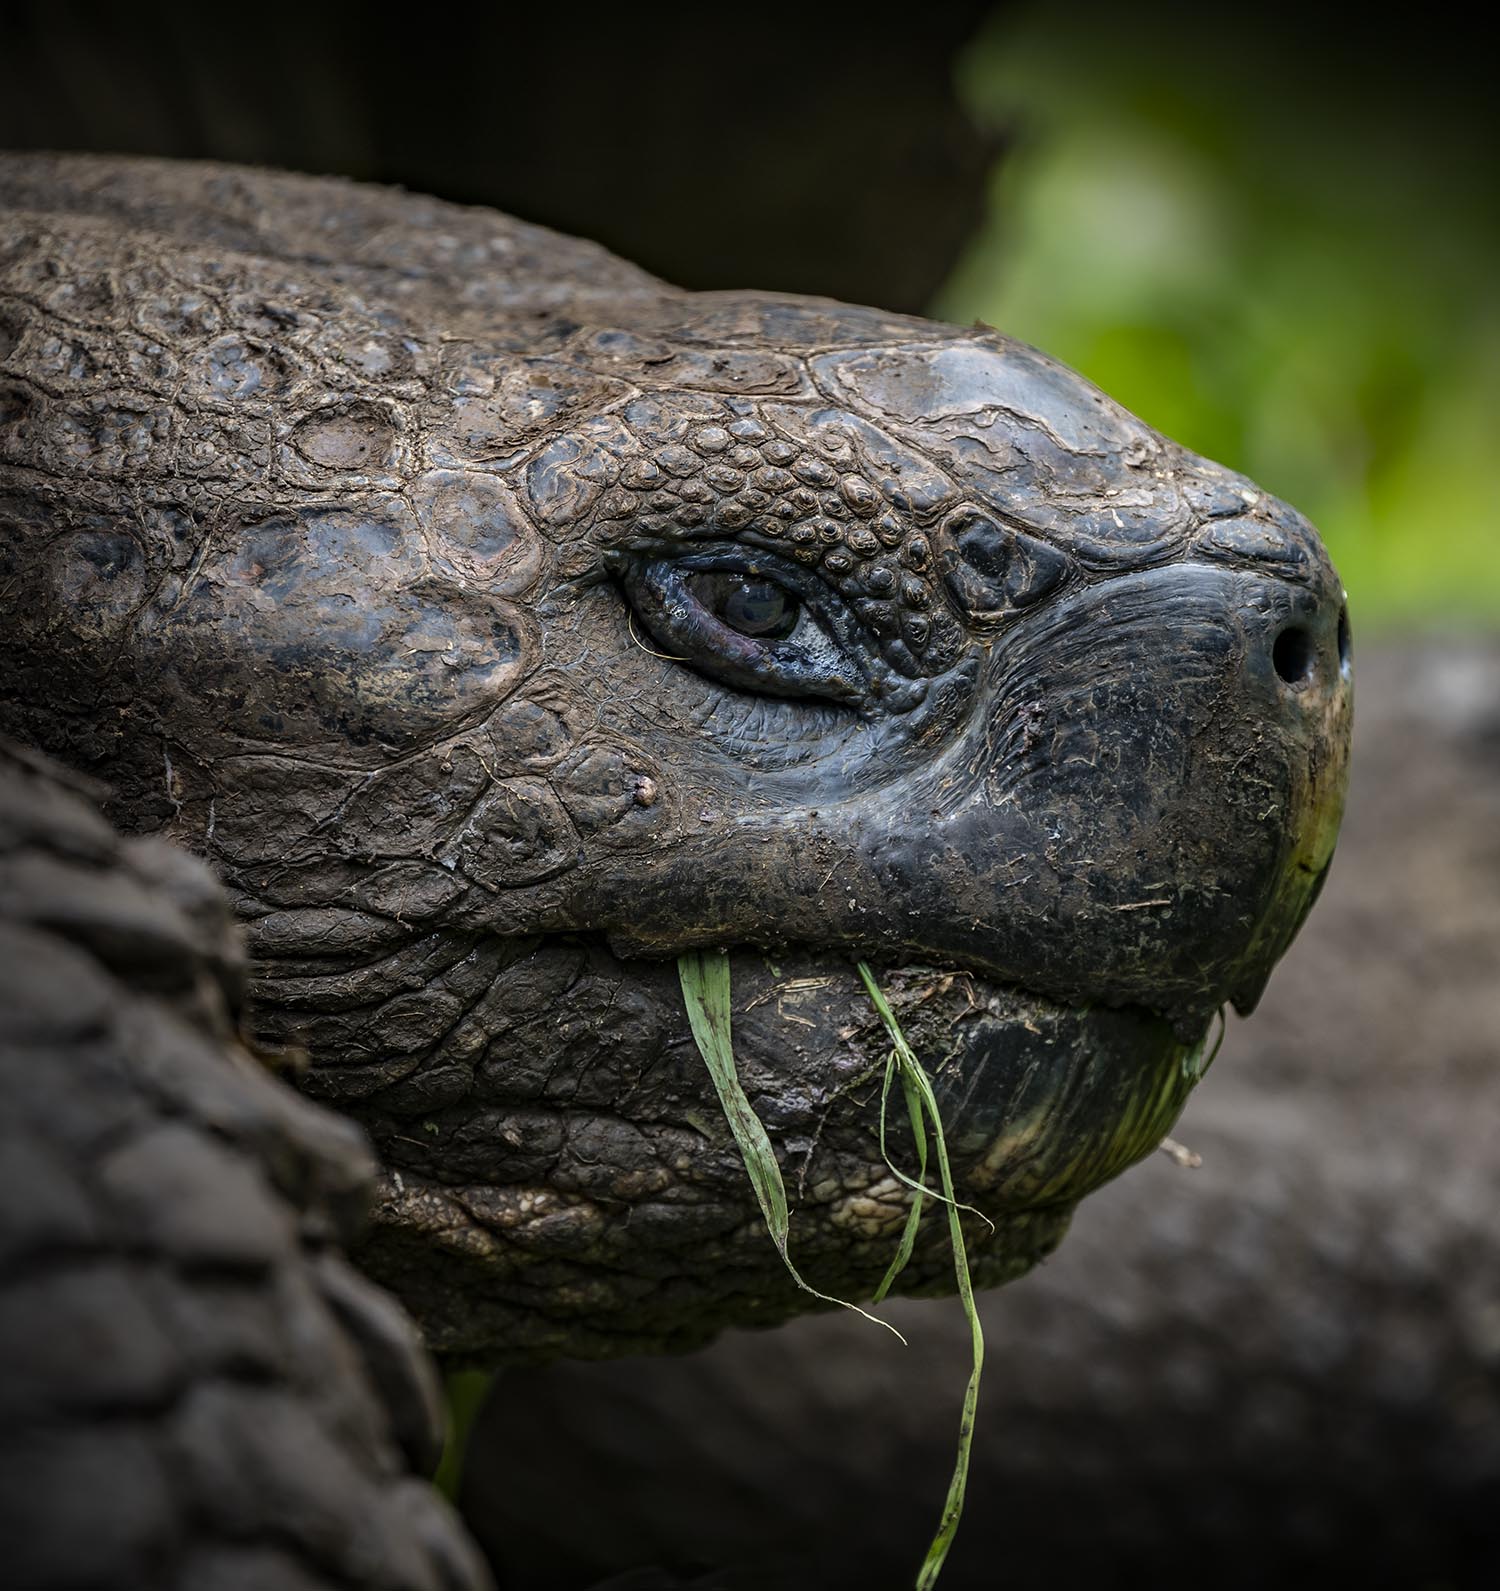 A large tortoise chewing grass